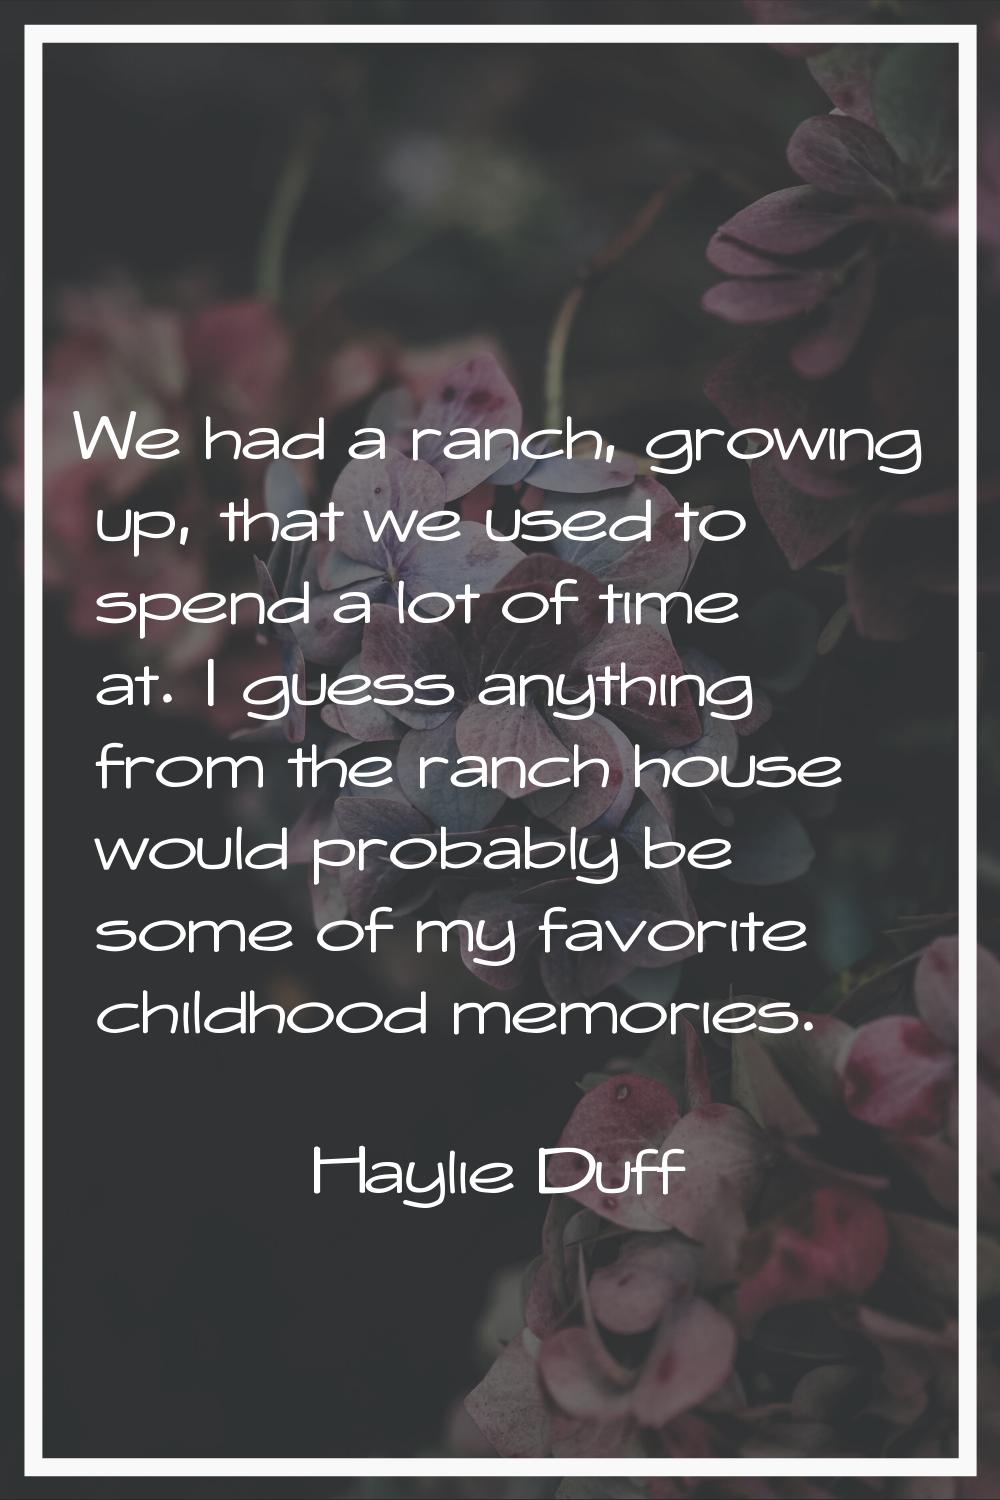 We had a ranch, growing up, that we used to spend a lot of time at. I guess anything from the ranch